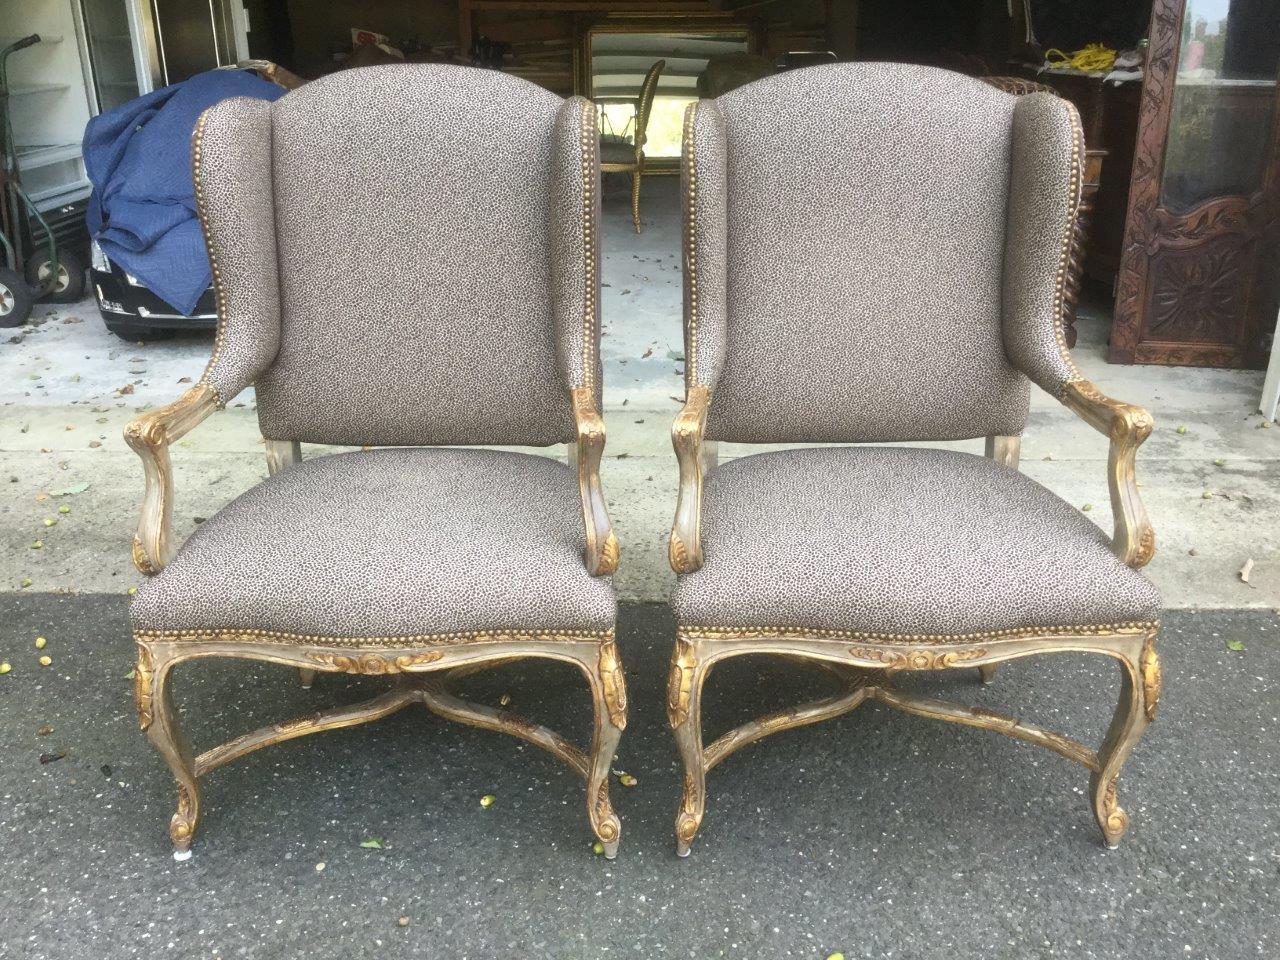 Gorgeous pair of vintage French style painted wingback armchairs upholstered in a soft brown cheetah print, and having carved and gilded frames. There is an elegant cross stretcher for added sturdiness. The custom upholstery is a quality woven print